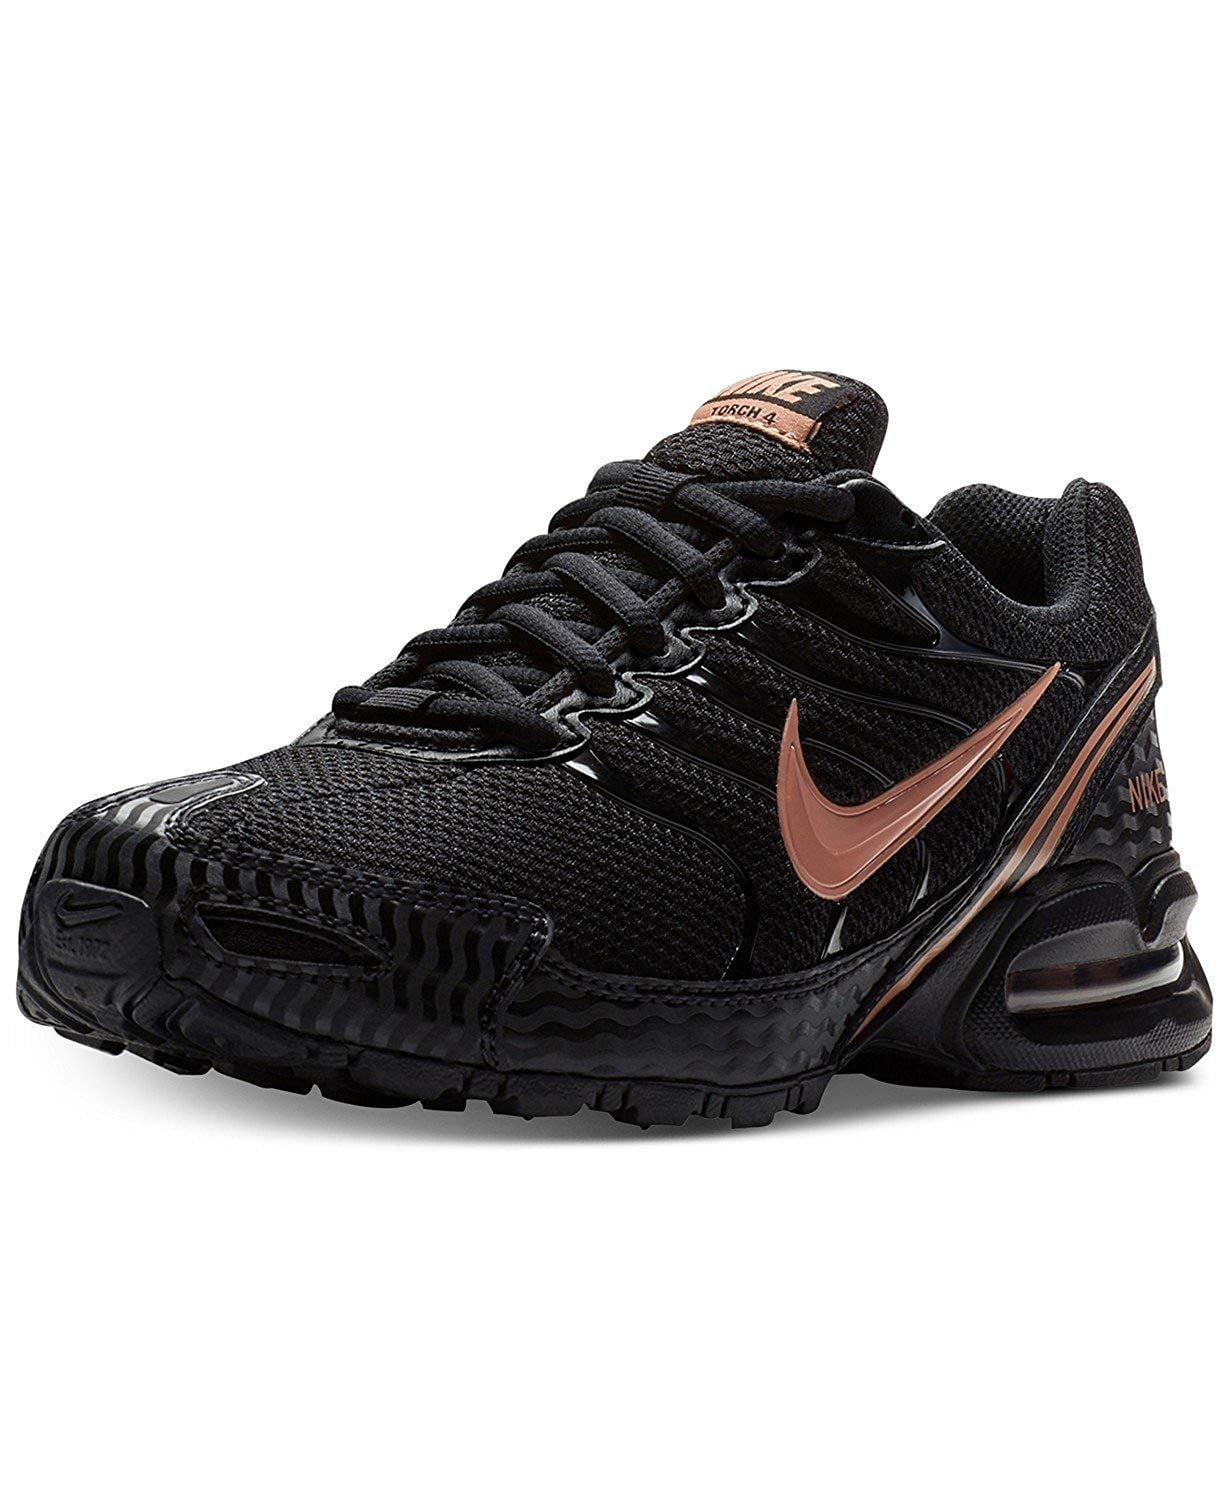 nike air max torch black and gold